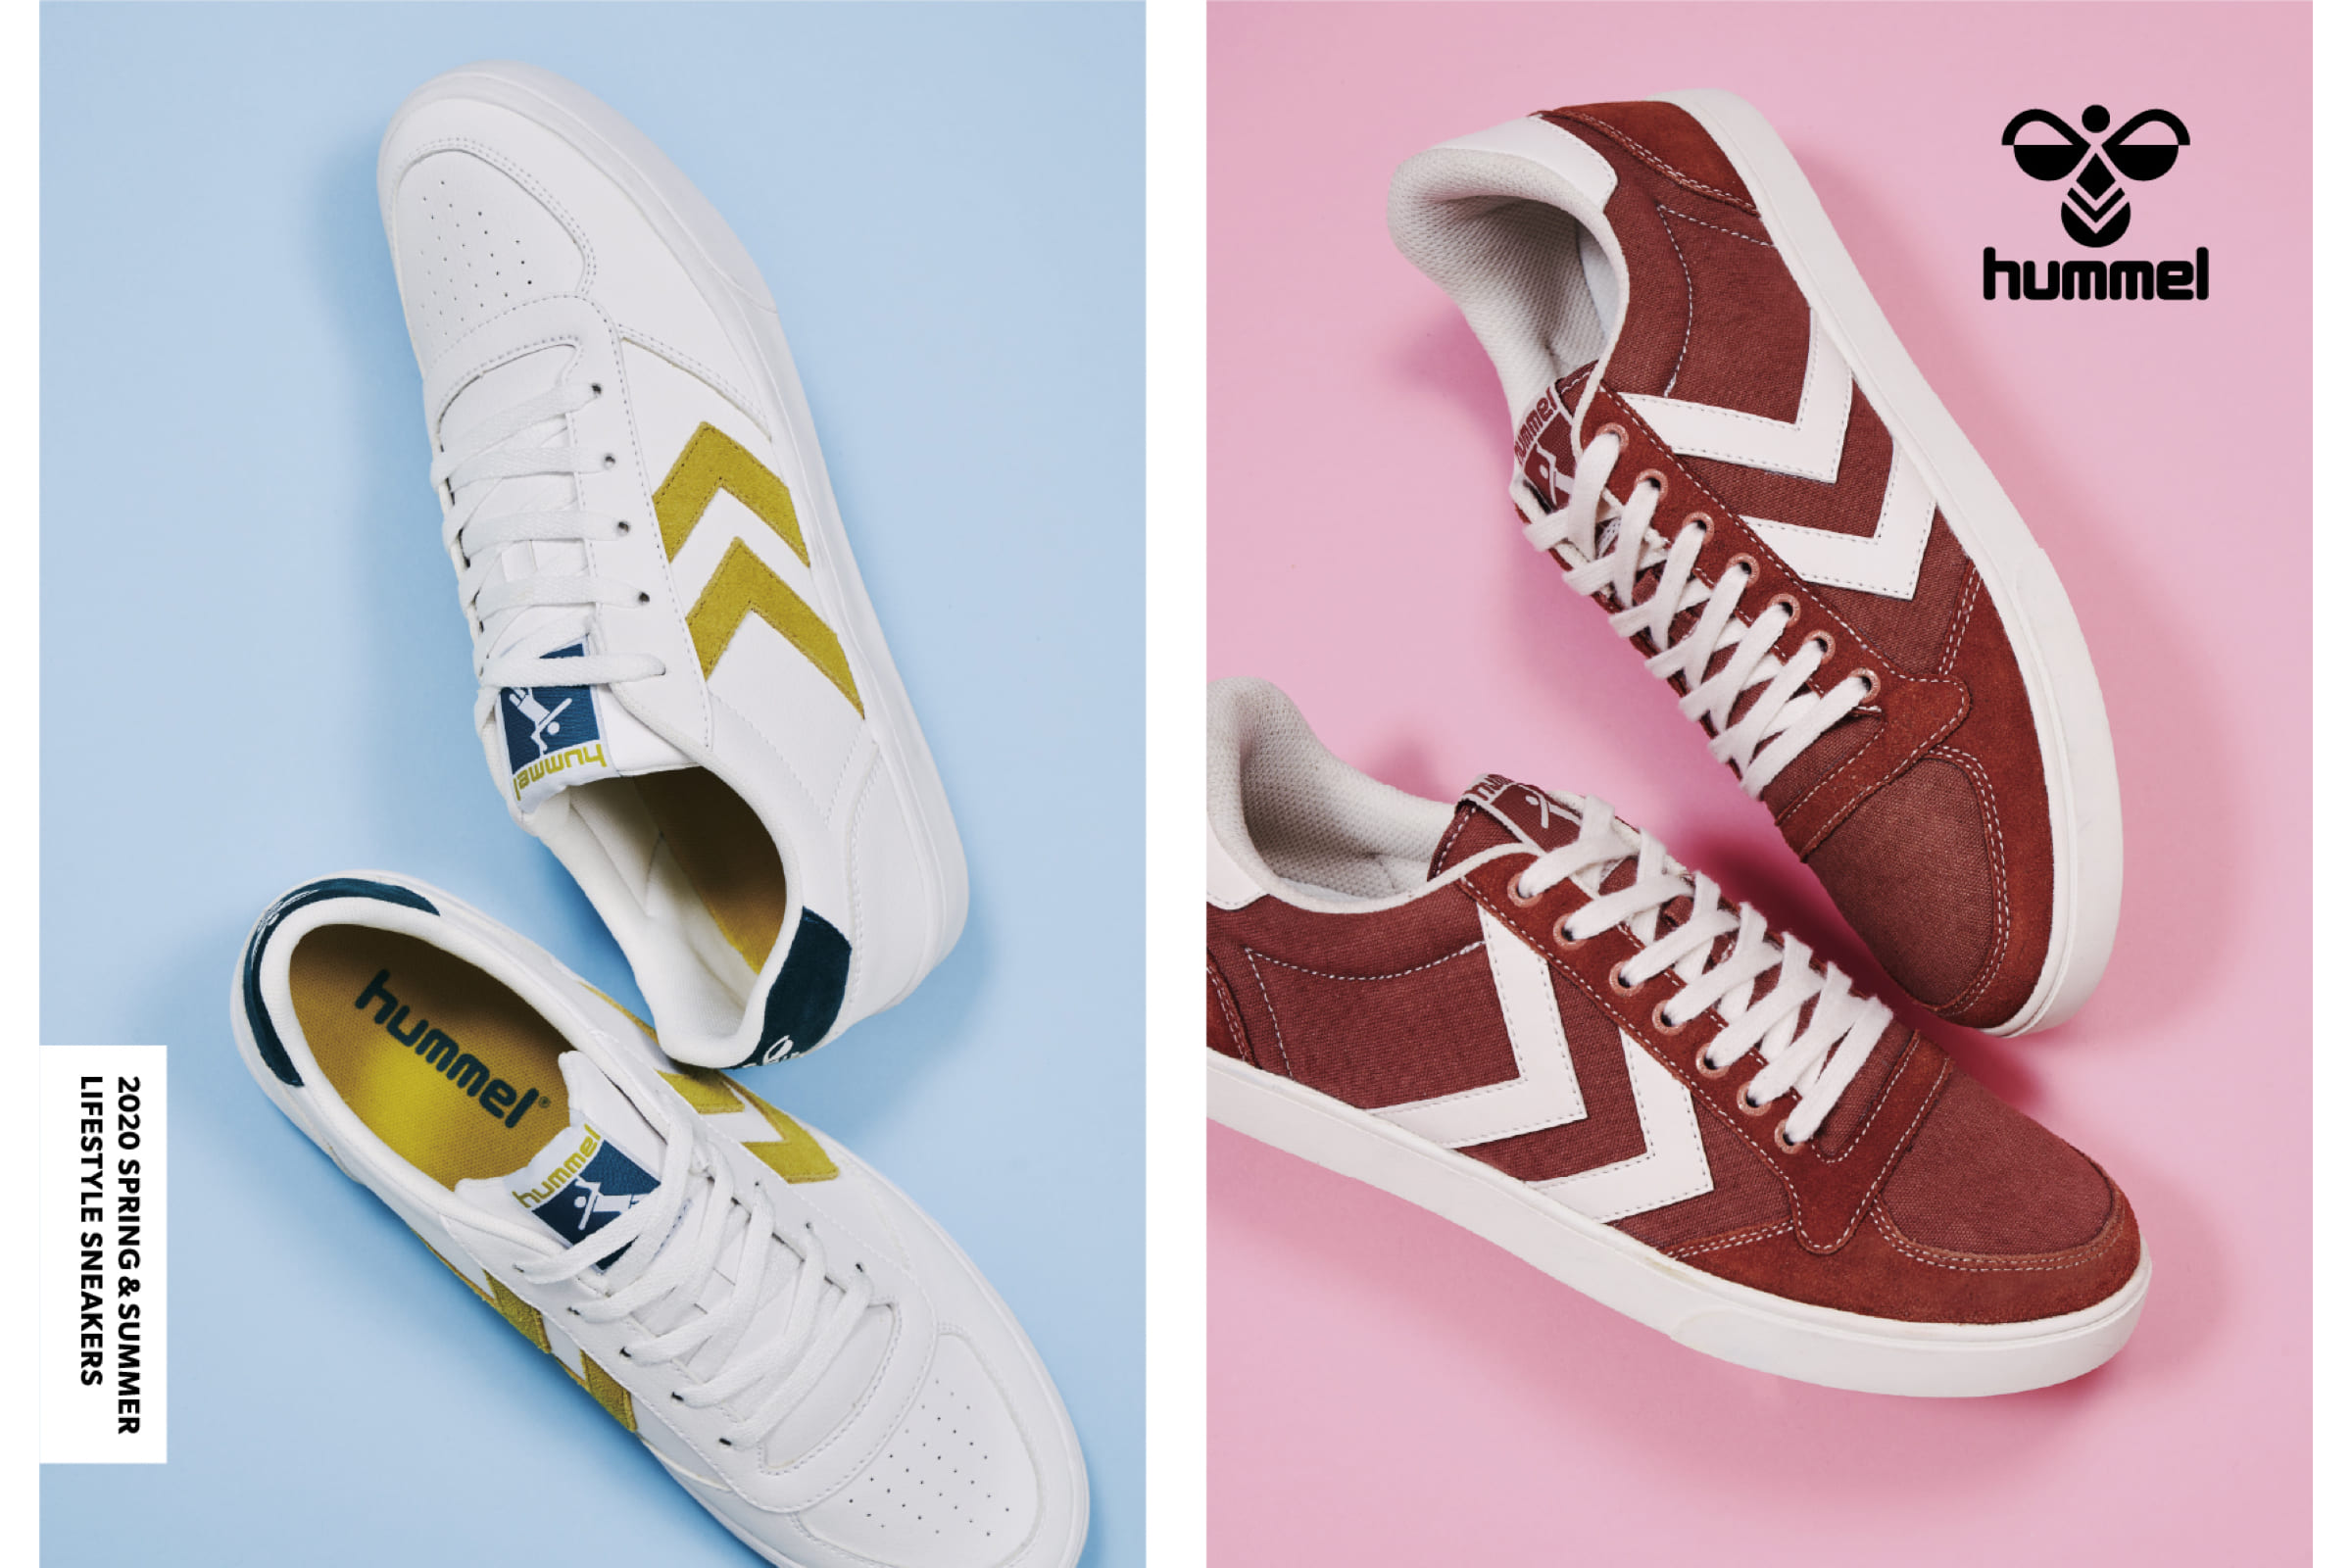 2020 SPRING  SUMMER LIFESTYLE SNEAKERS | hummel Official Web Site